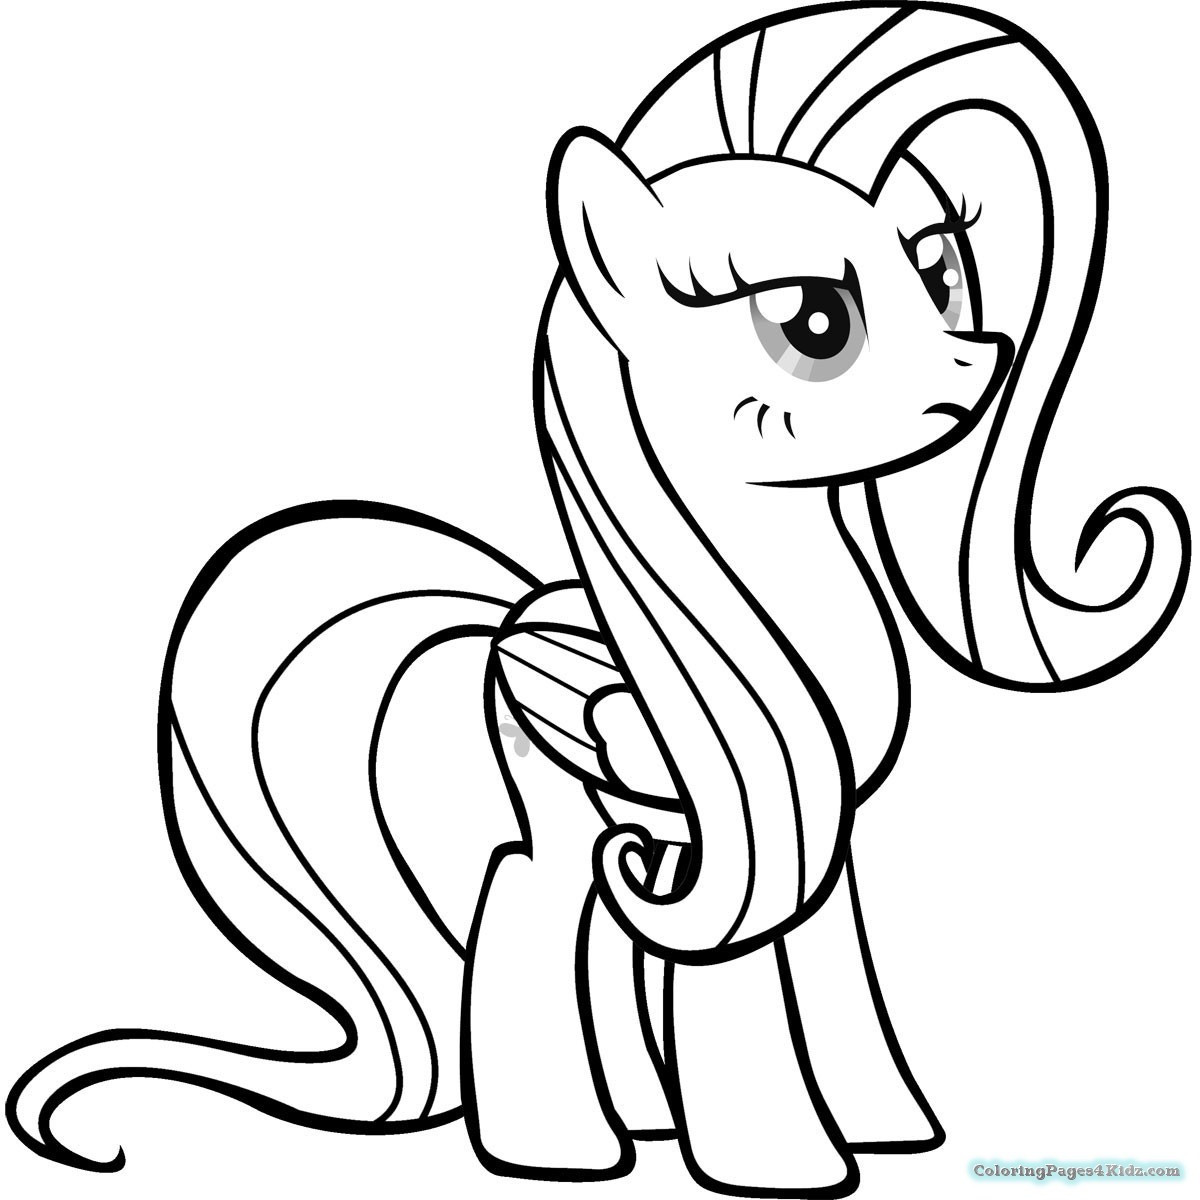 Baby My Little Pony Coloring Pages
 My Little Pony Coloring Pages Fluttershy Baby